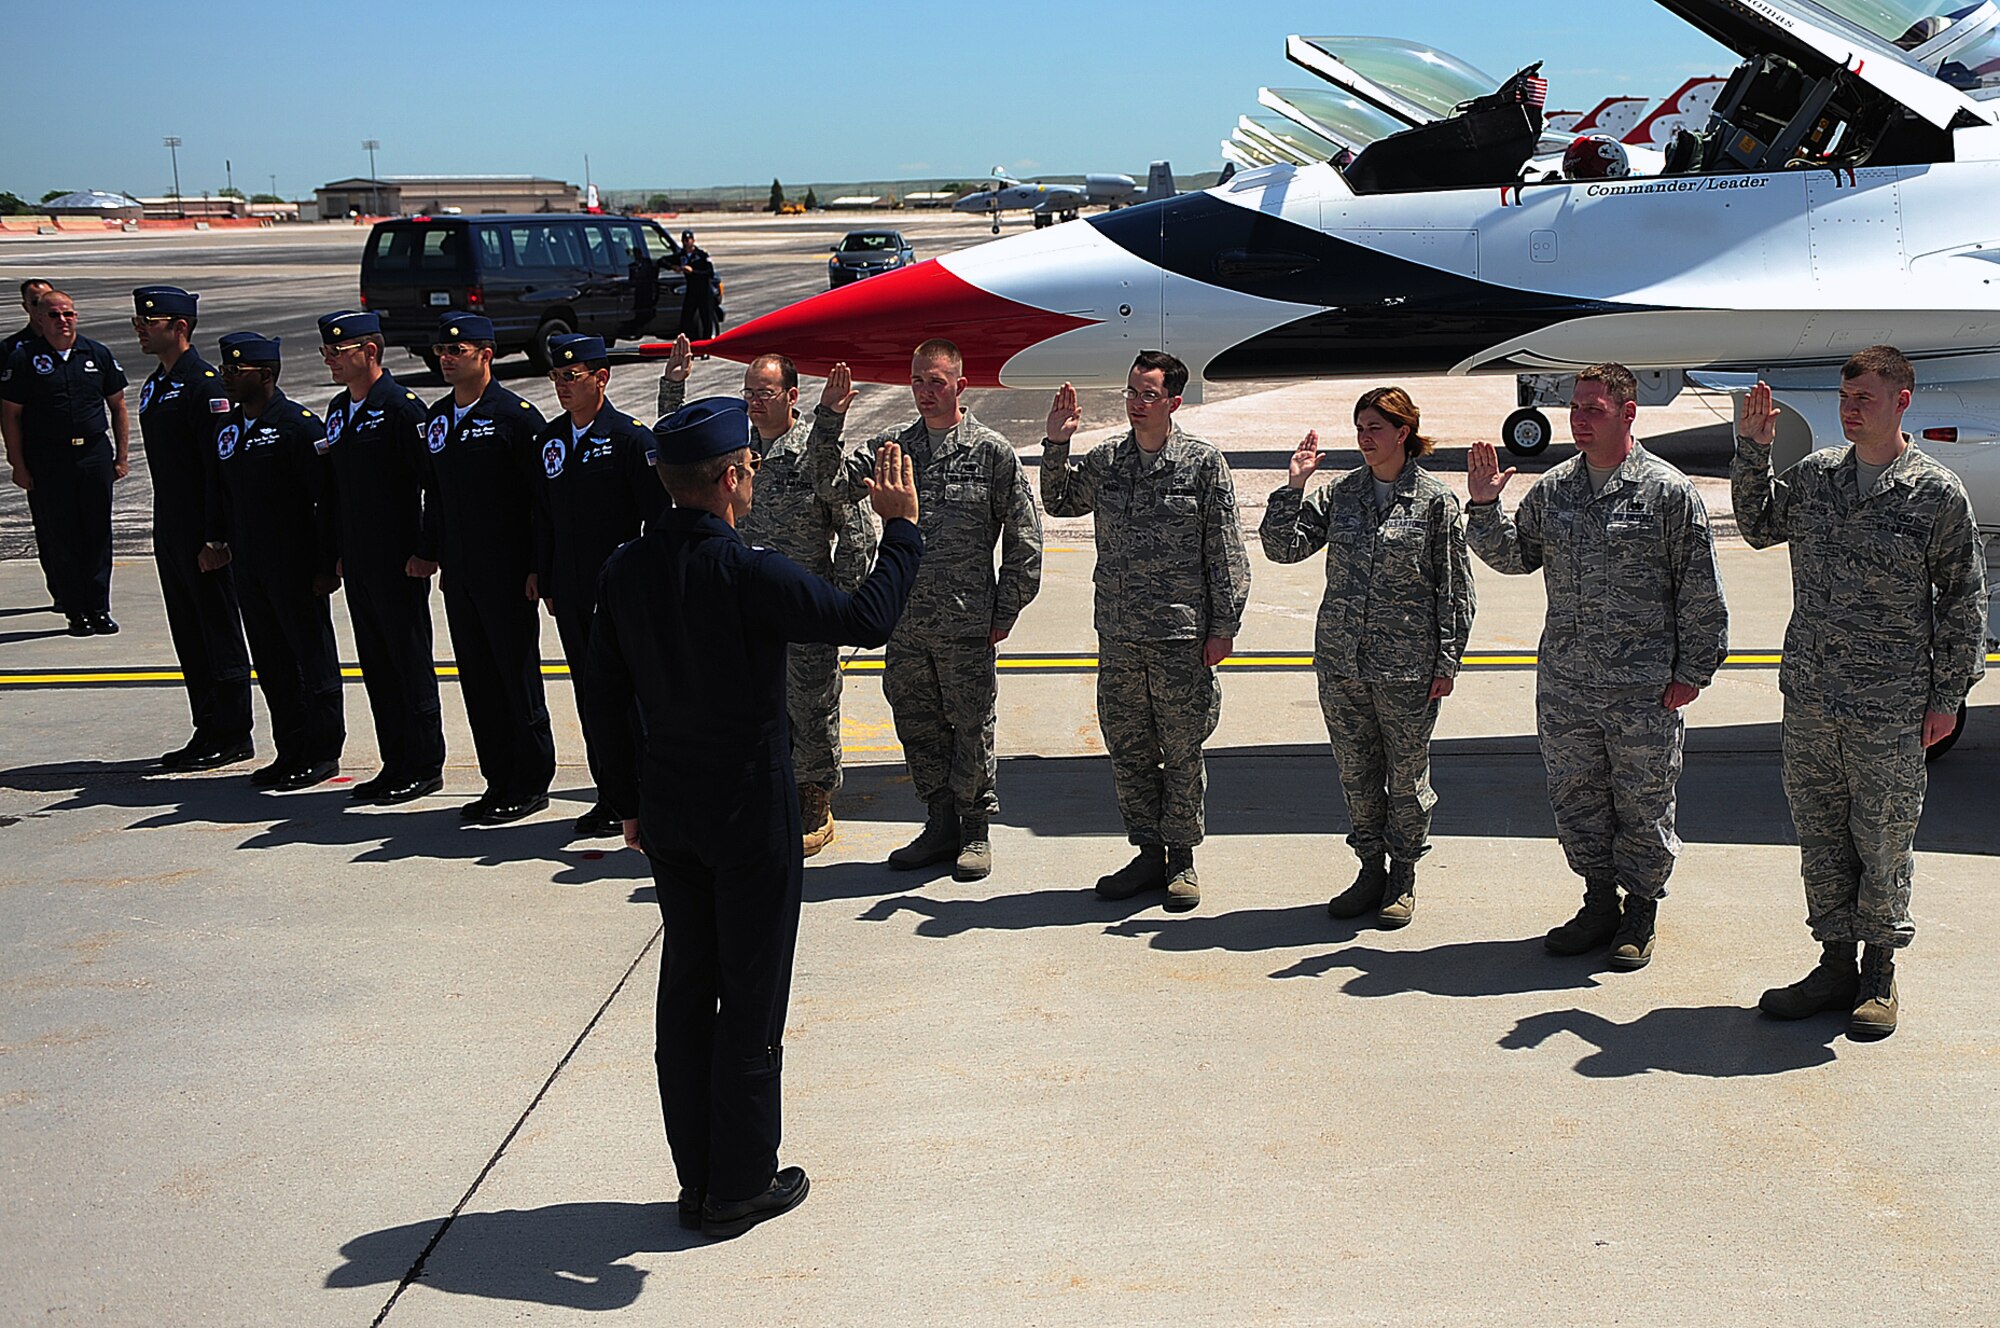 Airmen are reenlisted in the United States Air Force by Lt. Col. Greg Thomas, Thunderbirds commander here, May 29.  The six Airmen who were reenlisted were congratulated by members of the Thunderbirds after the ceremony. (U.S. Air Force photo/Airman 1st Class Joshua J. Seybert)

